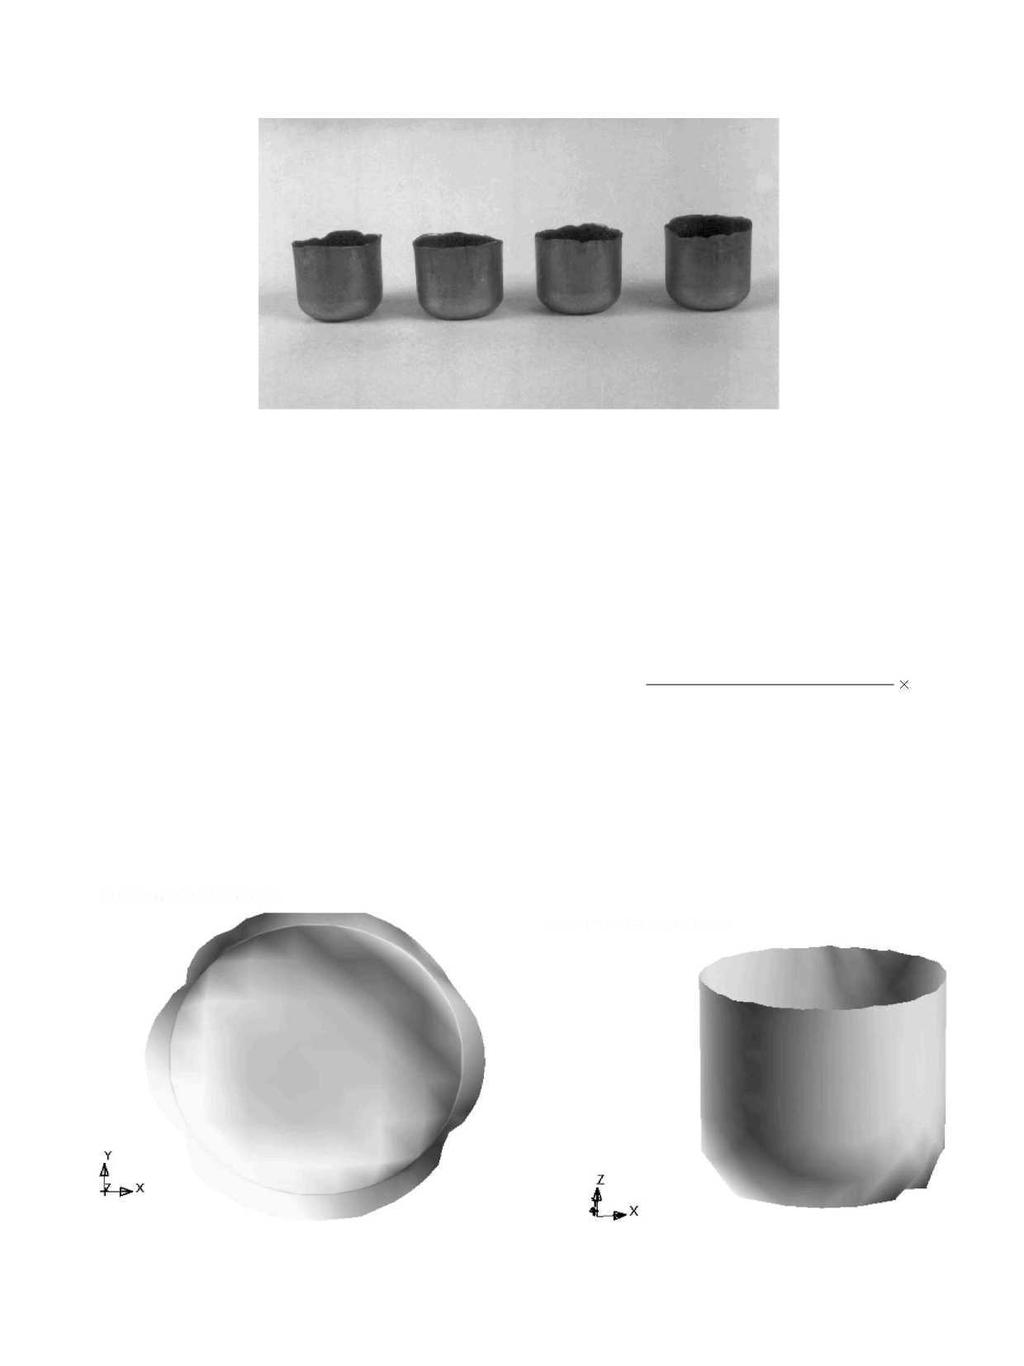 28 N. Kishor, D. Ravi Kumar/Journal of Materials Processing Technology 130-131 (2002) 20-30 Fig. 8. Cups drawn experimentally from modified blanks obtained after first stage of modification.